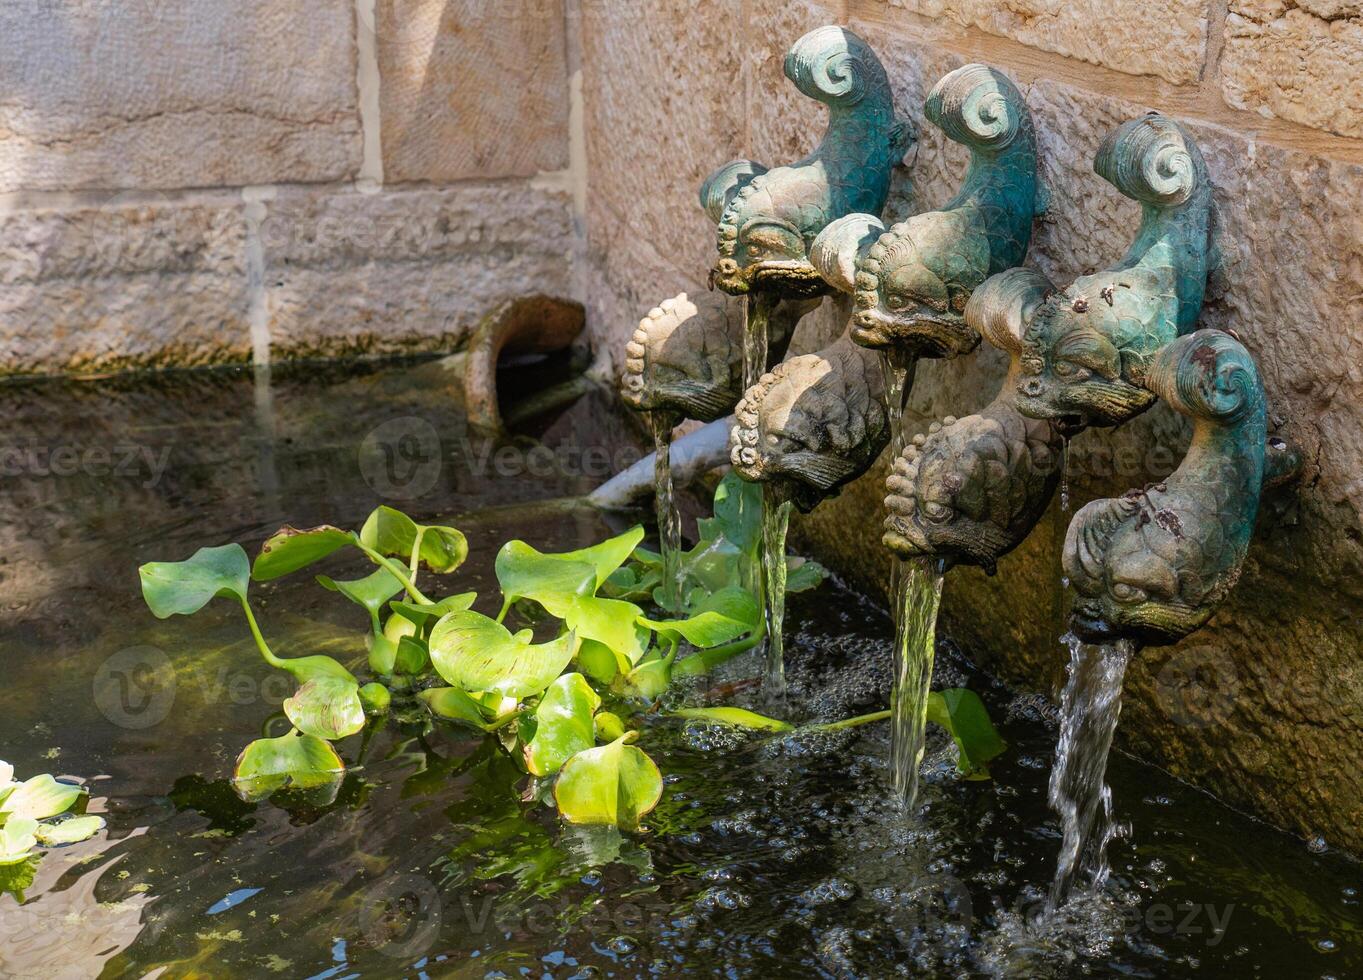 The Church of the Multiplication of the Loaves and the Fishes, Tabha, Israel. Fountain with bronze fishes. High quality photo